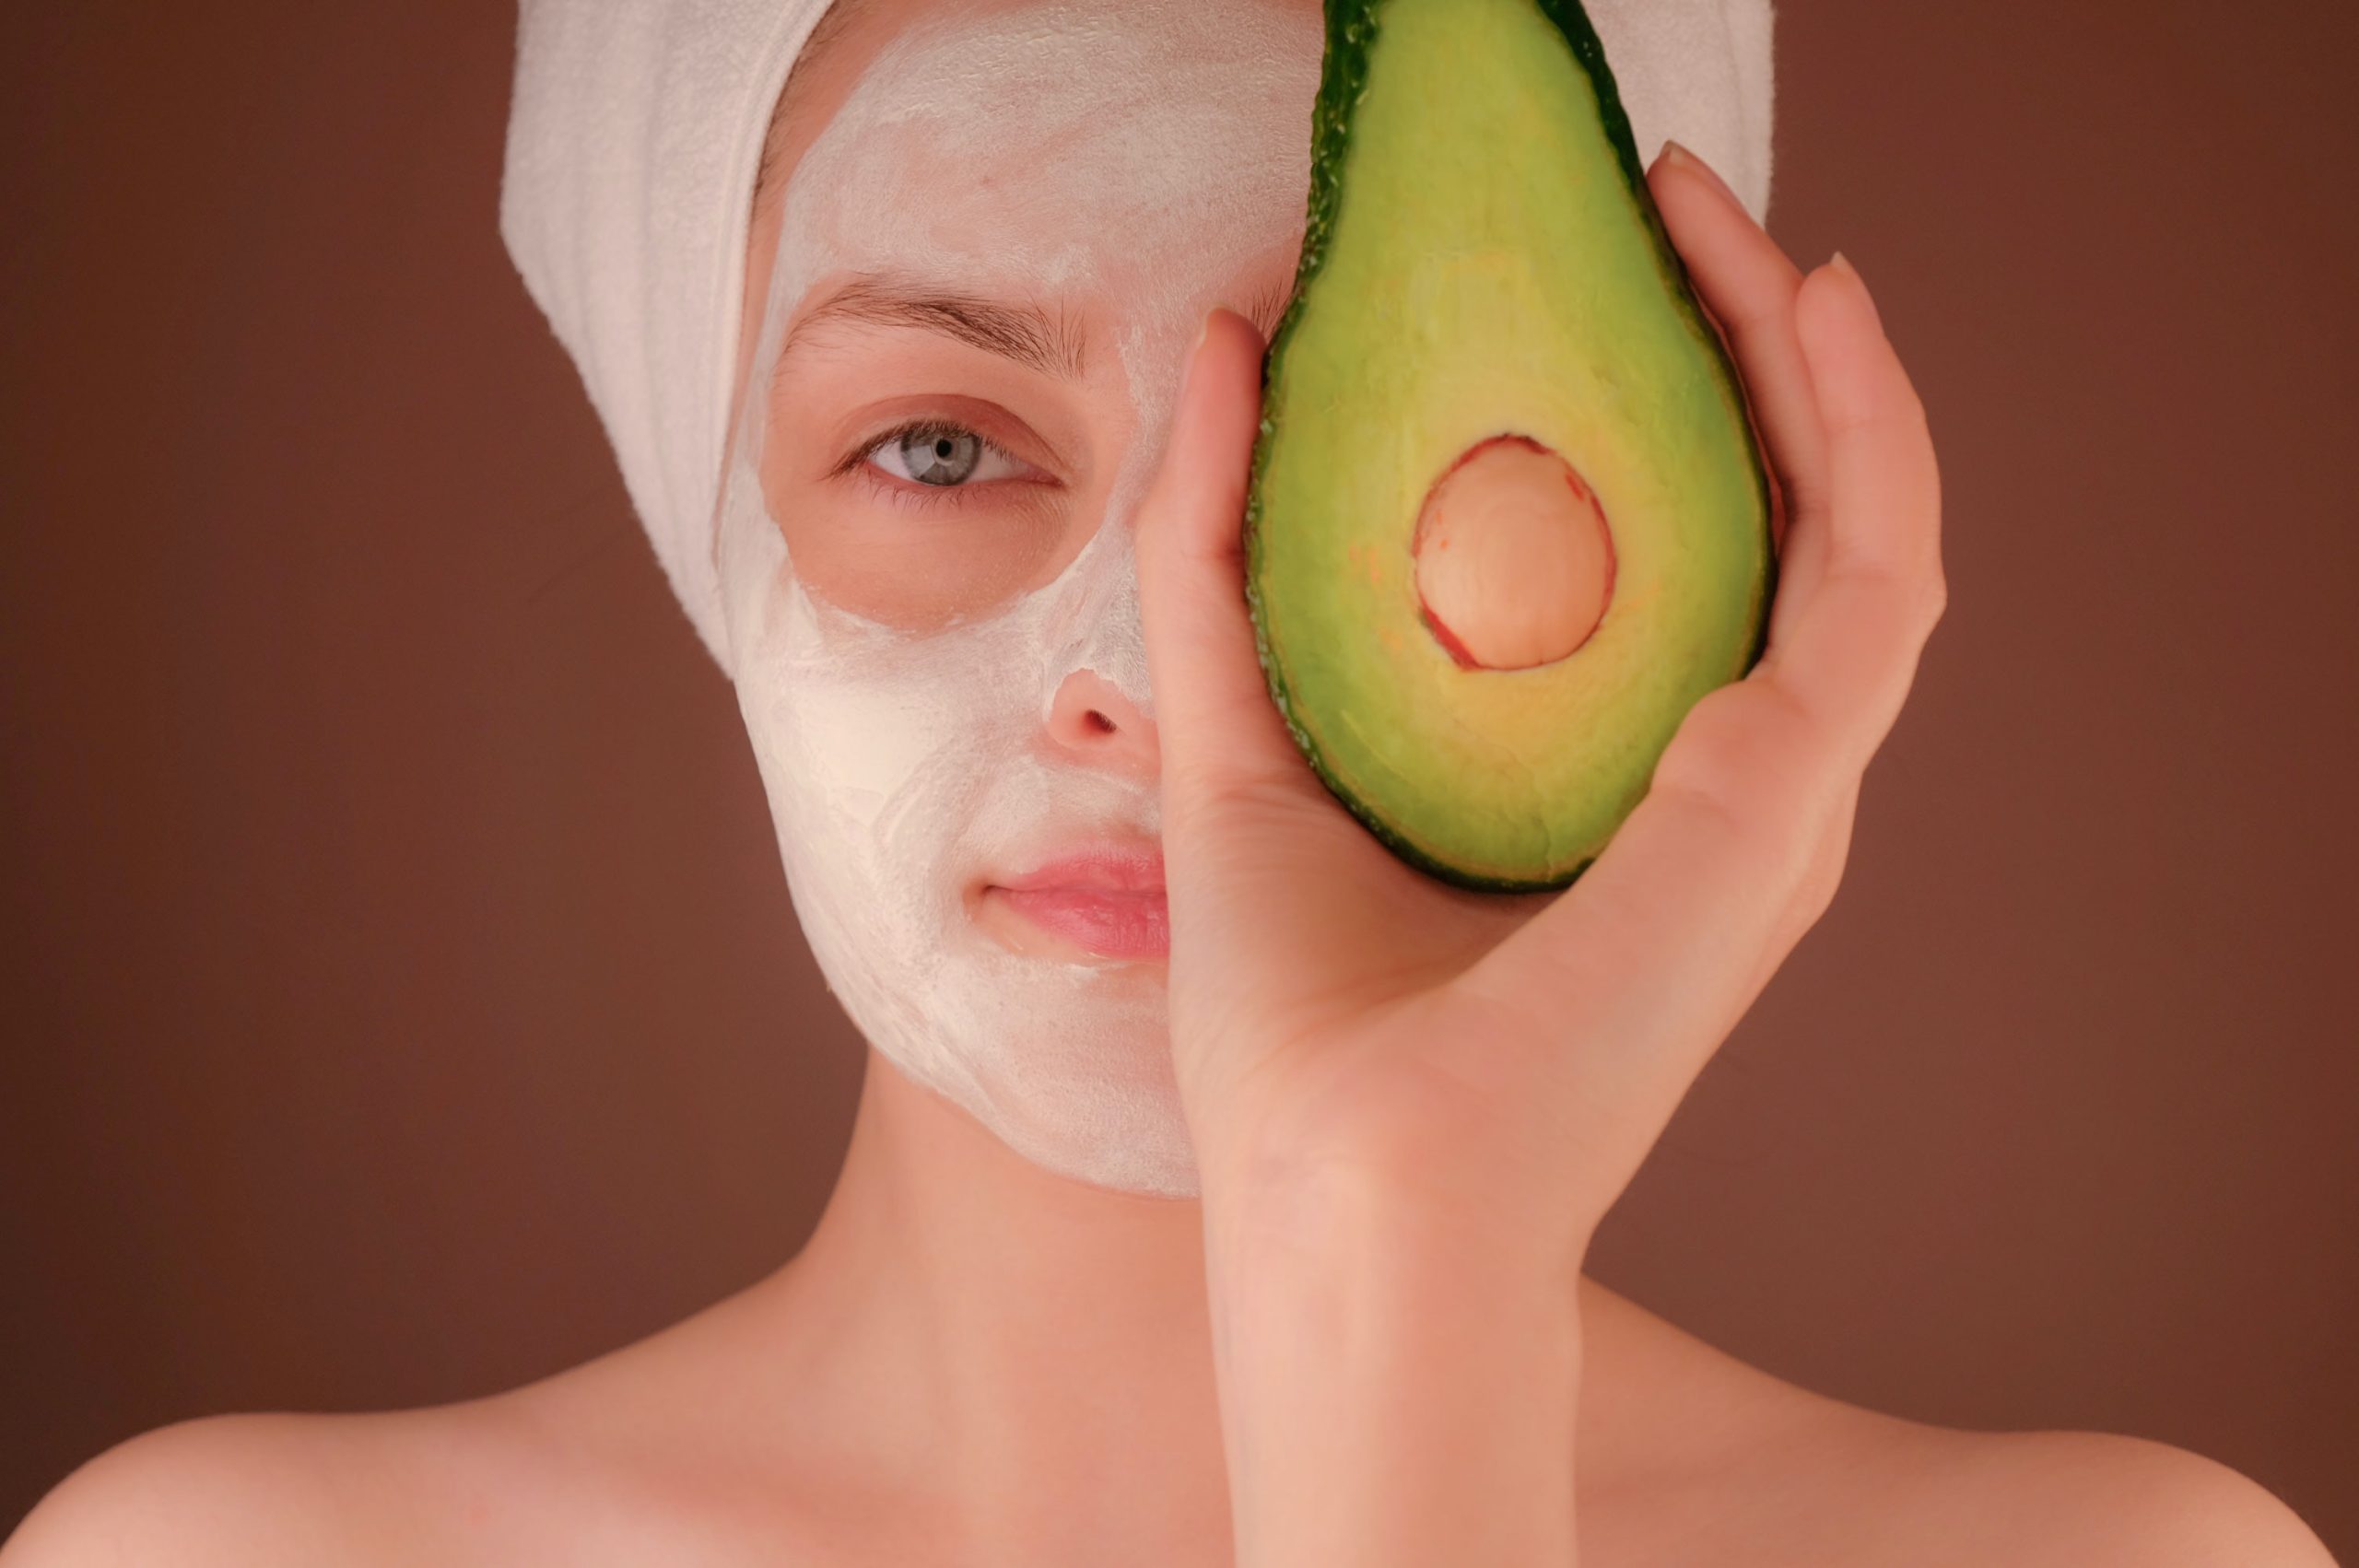 How to care for the skin not only at the face mask time